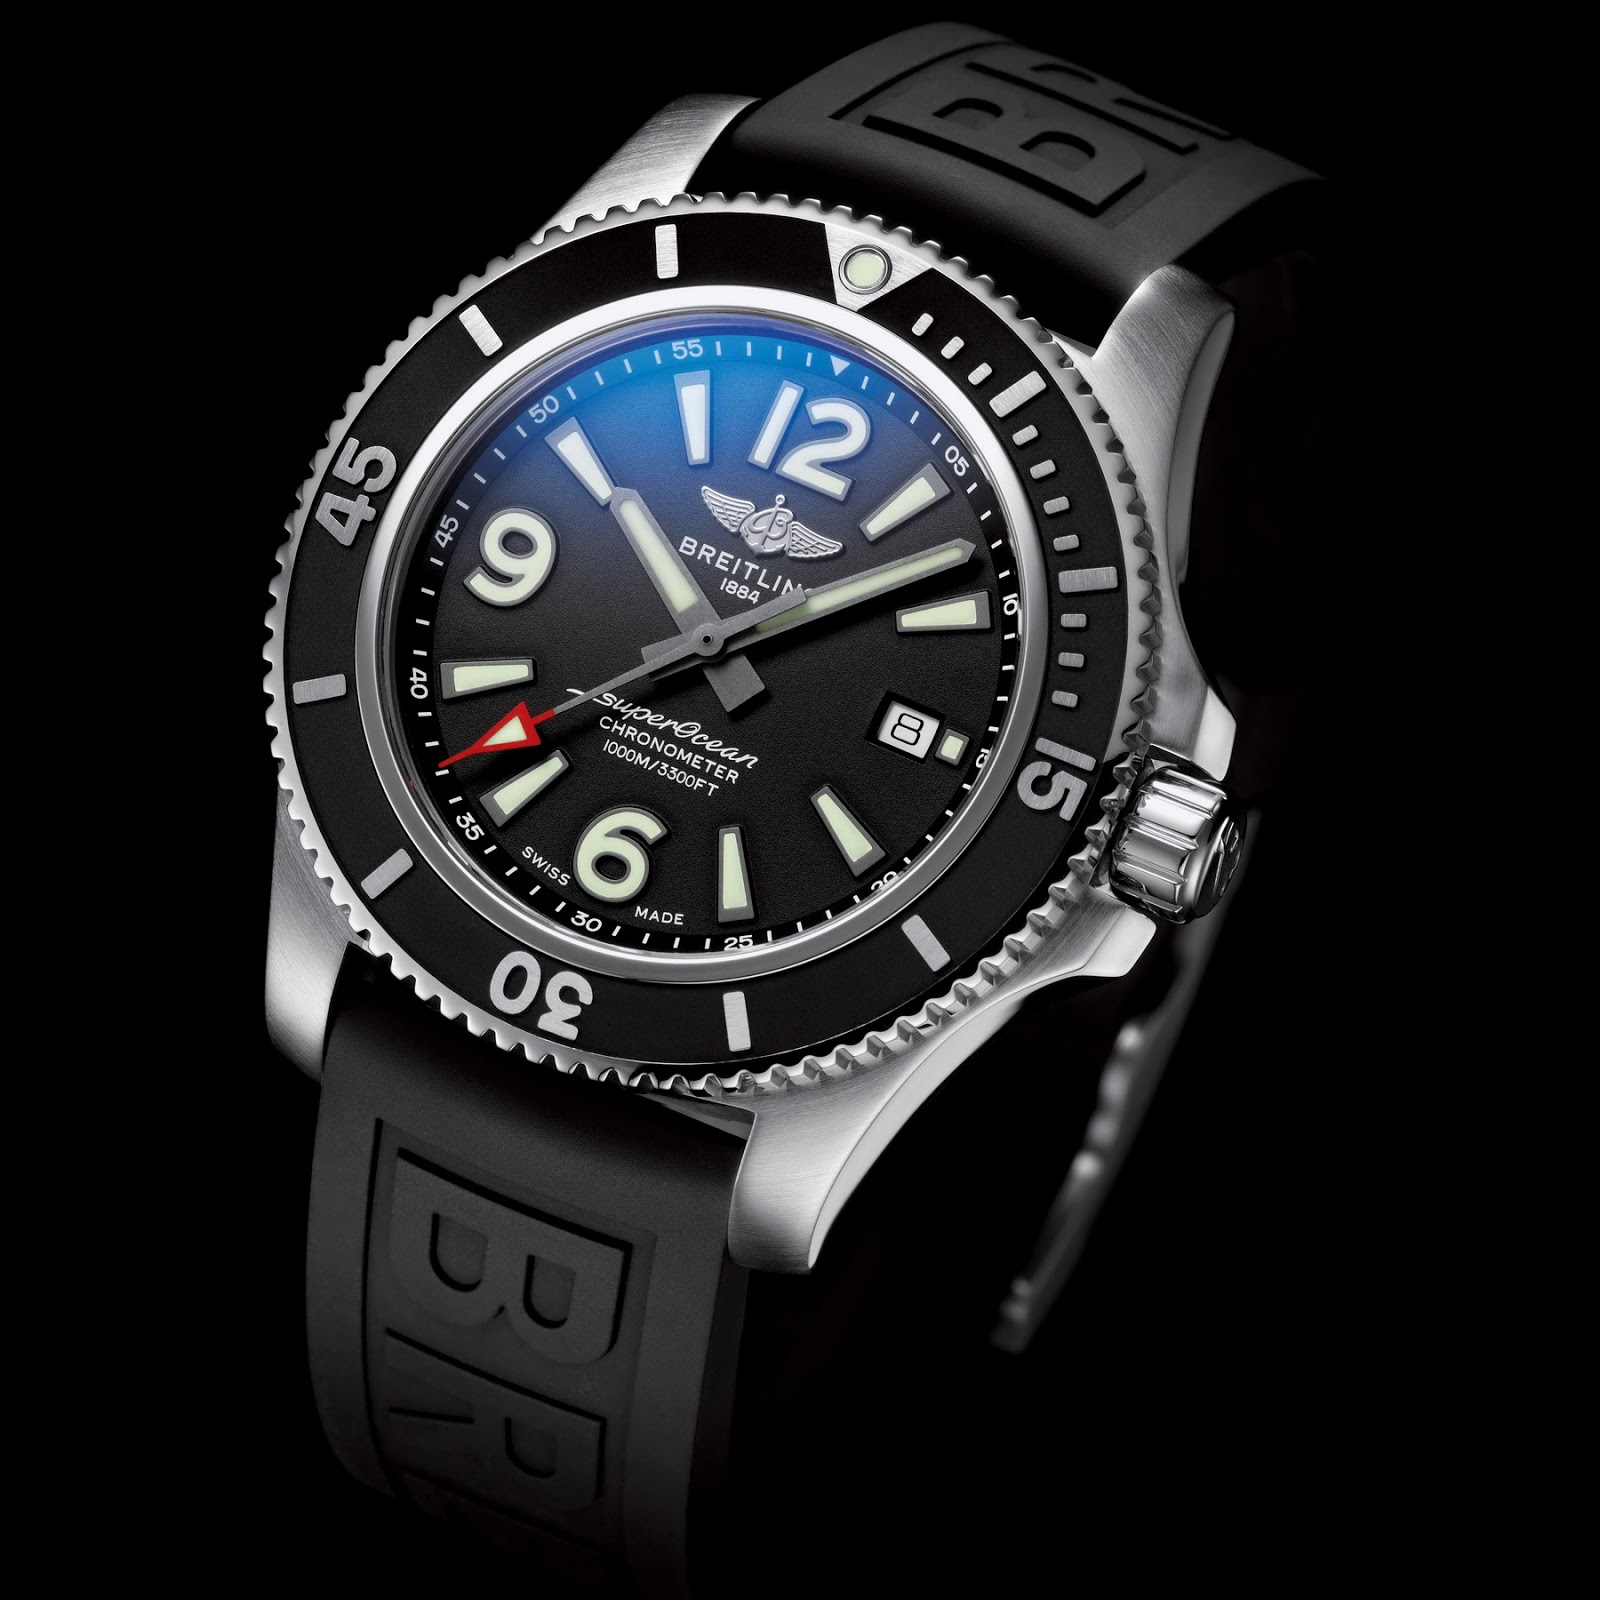 Breitling's newest from Baselworld 2019 BREITLING%2BSuperocean%2B44%2B01